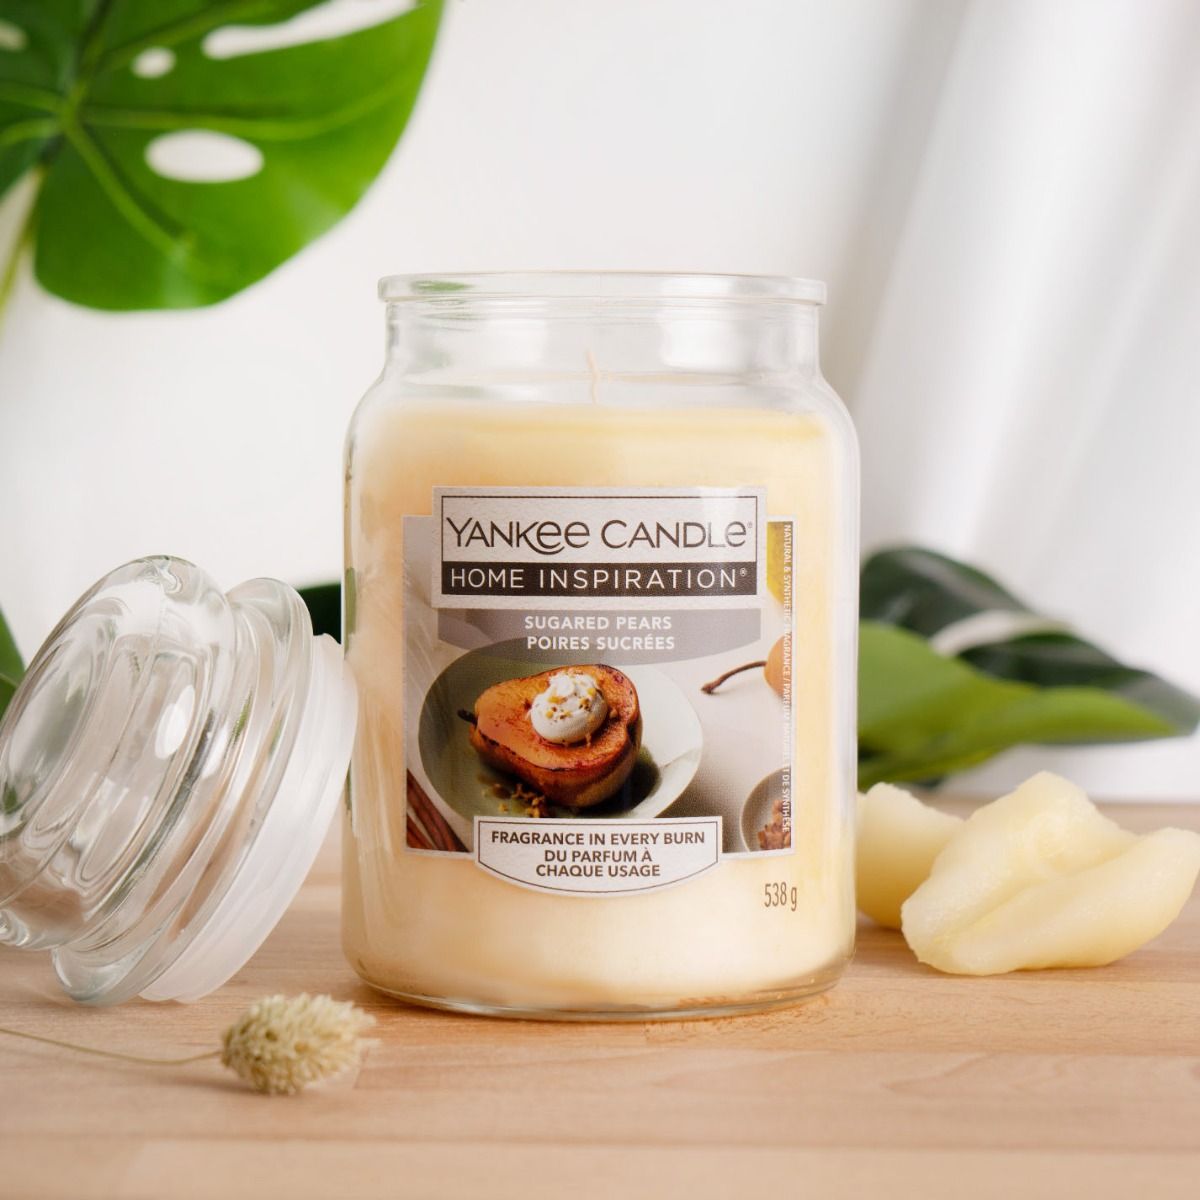 Yankee Candle Home Inspiration Large Jar - Sugared Pears